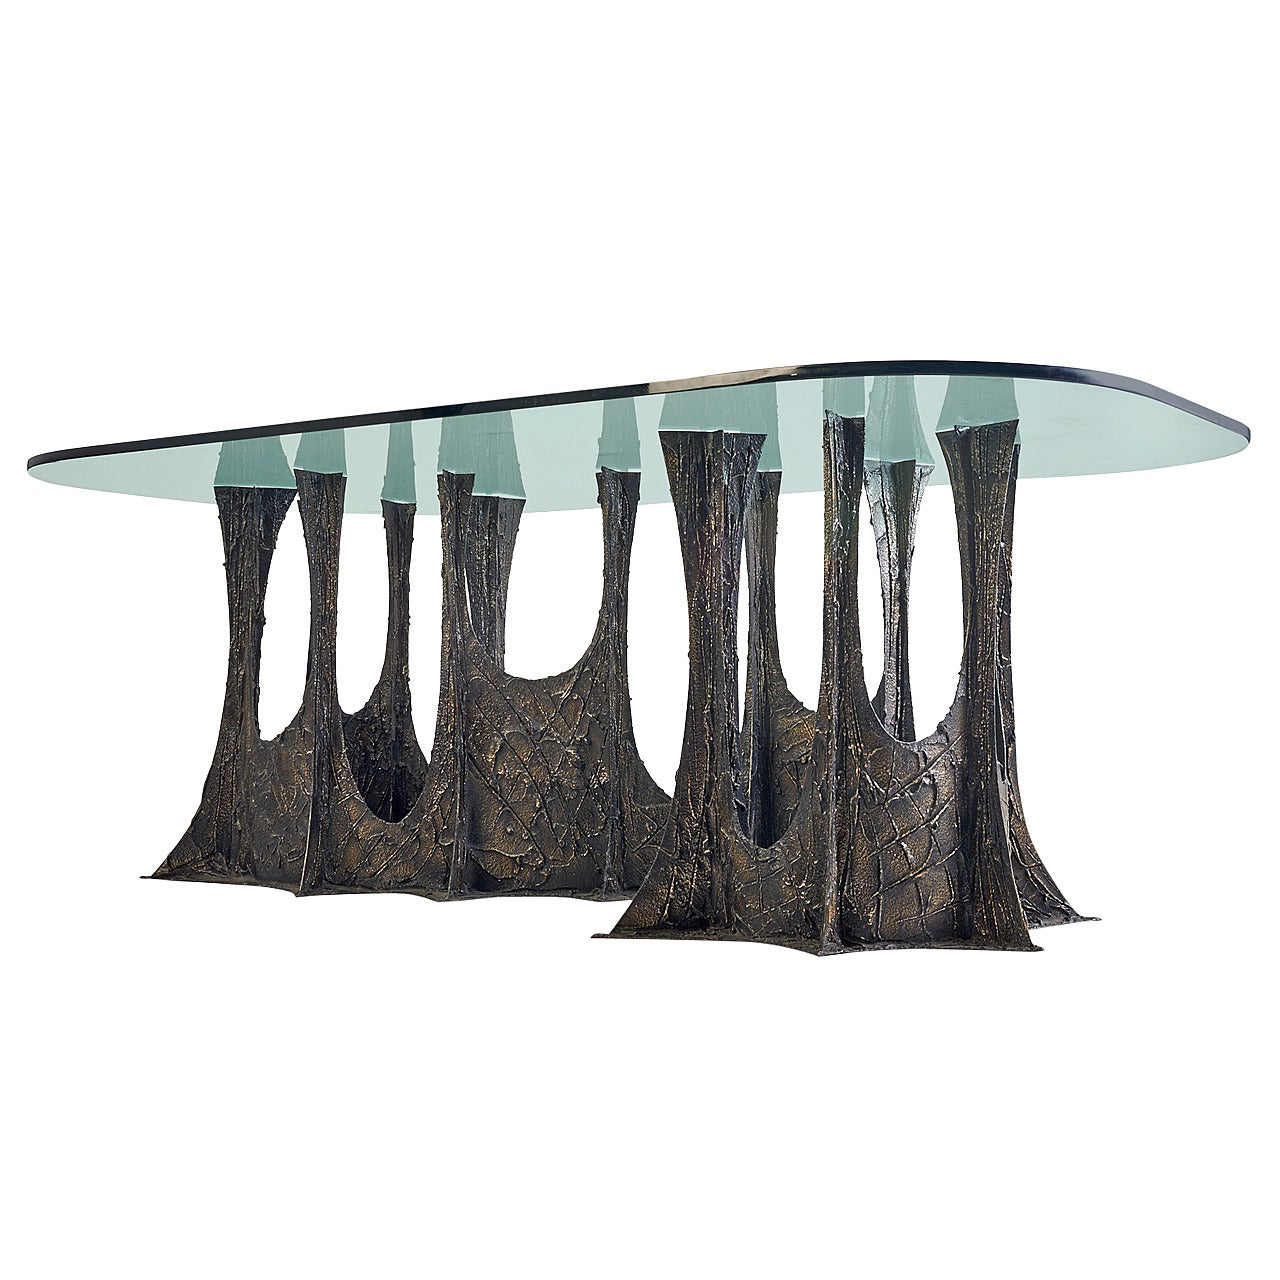 Paul Evans 1969 Stalagmite Signed Dining Table For Sale